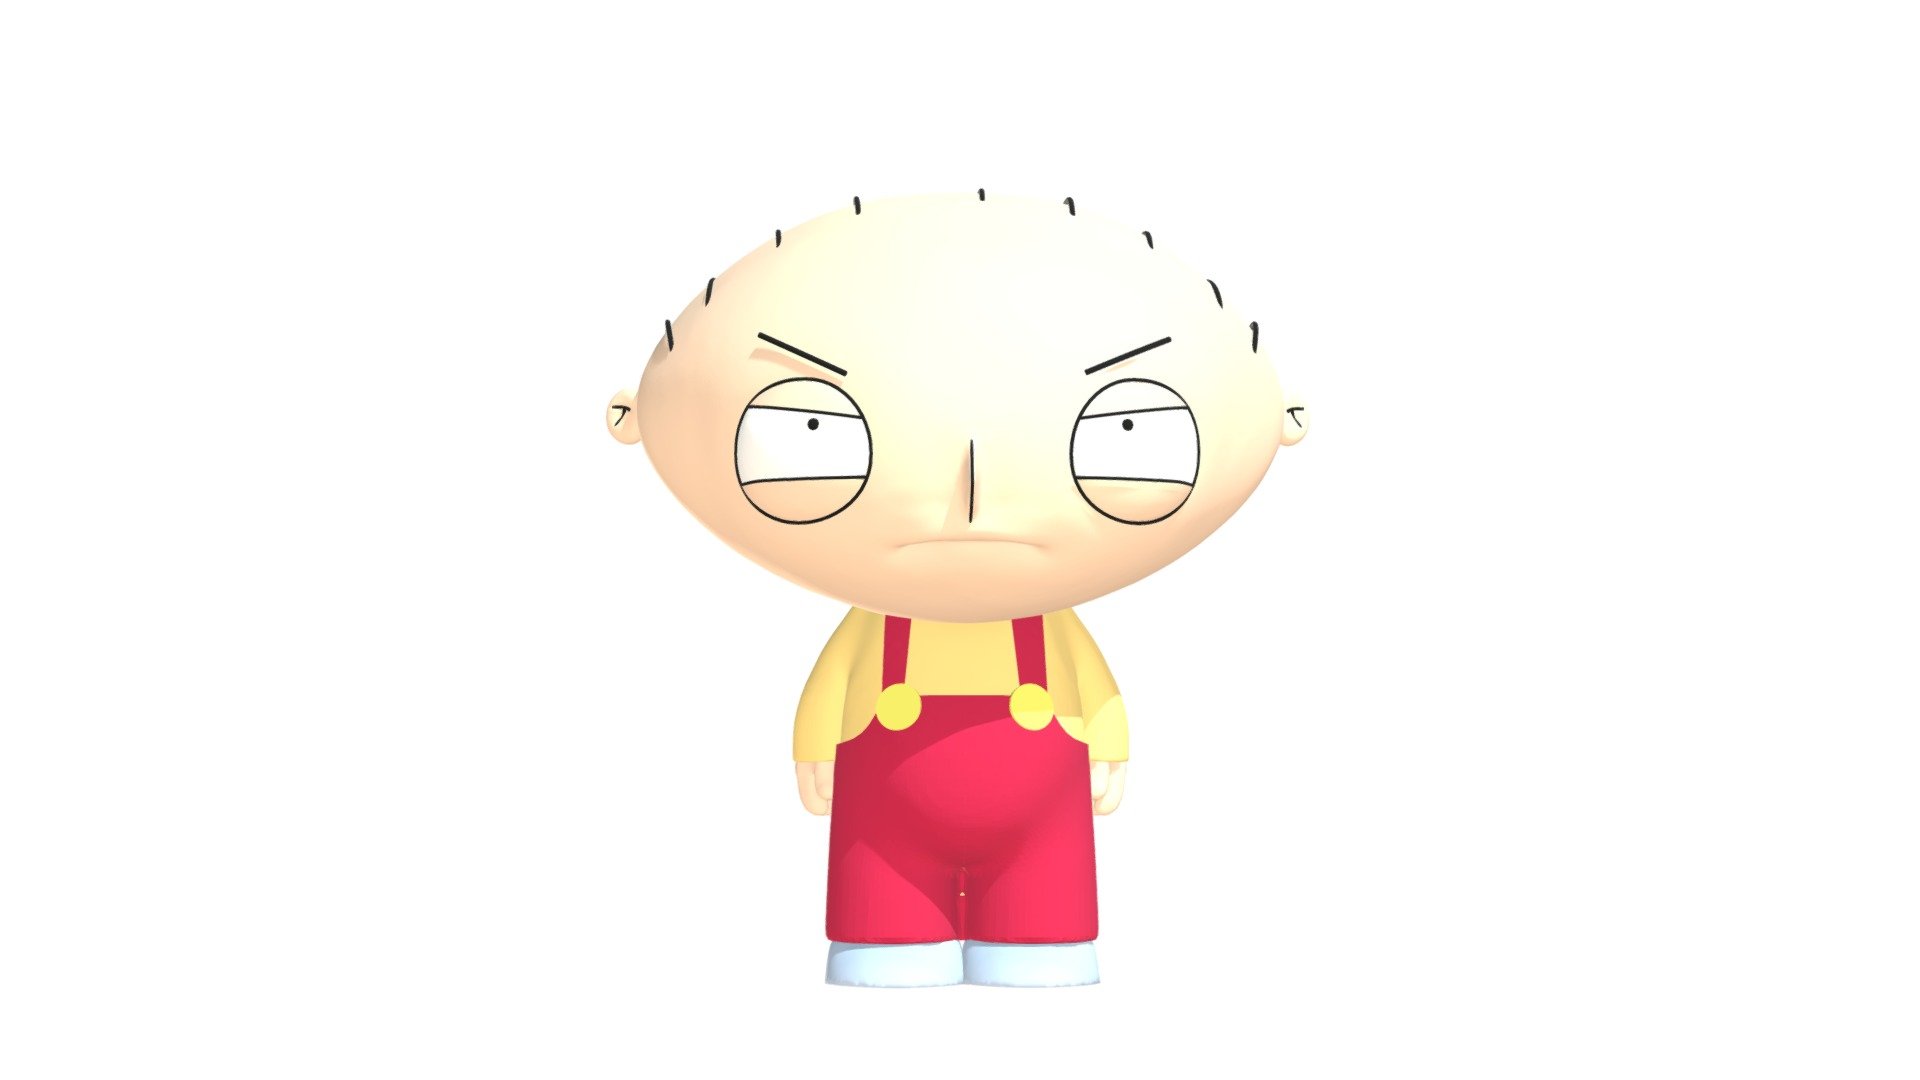 real life stewie griffin